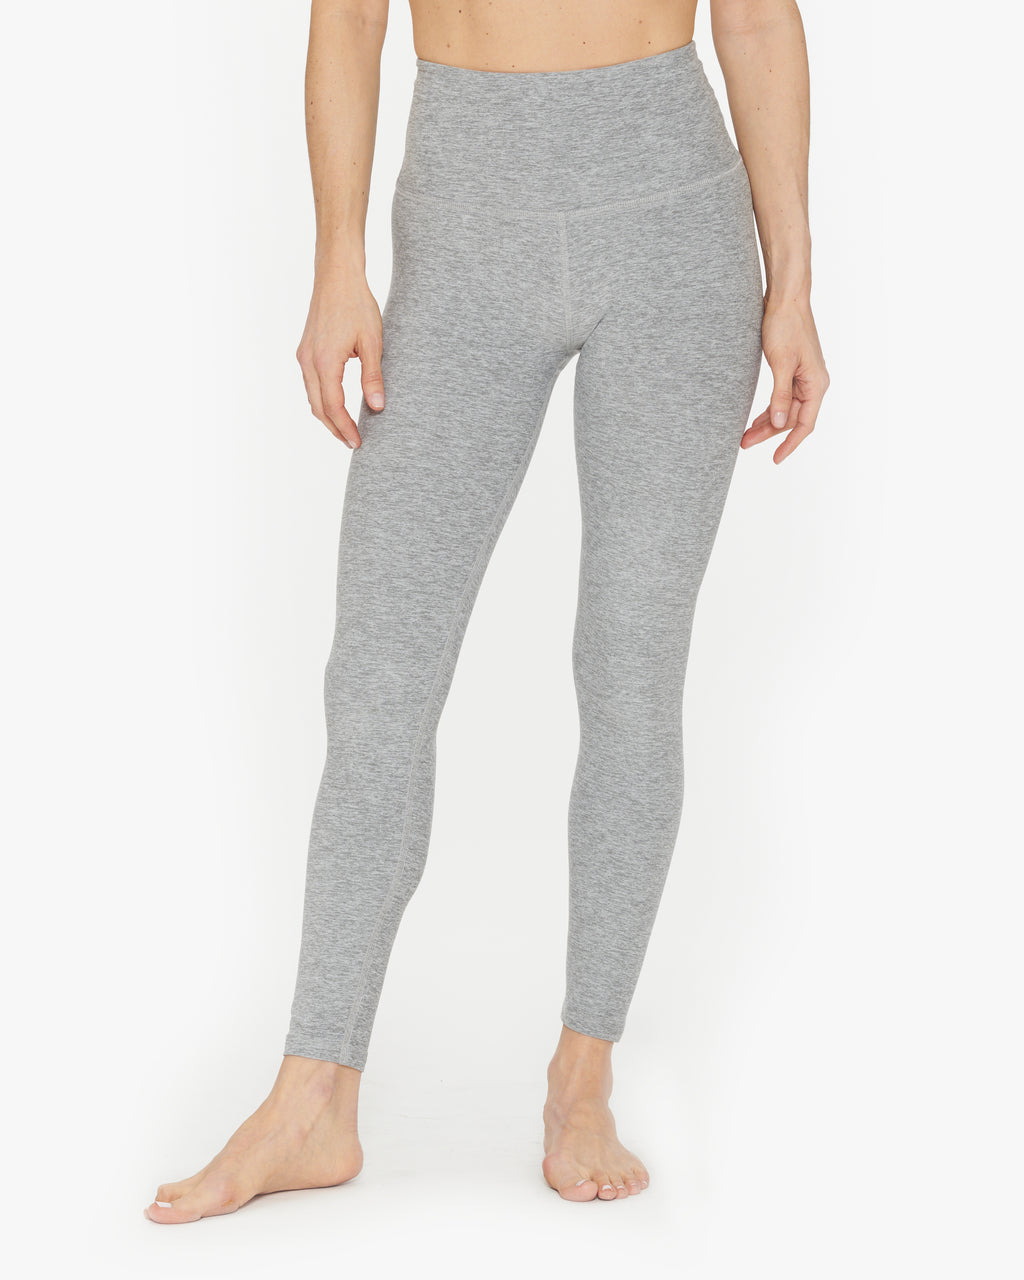 Spacedye Caught In The Midi High Waisted Leggings for Women - Up to 50% off